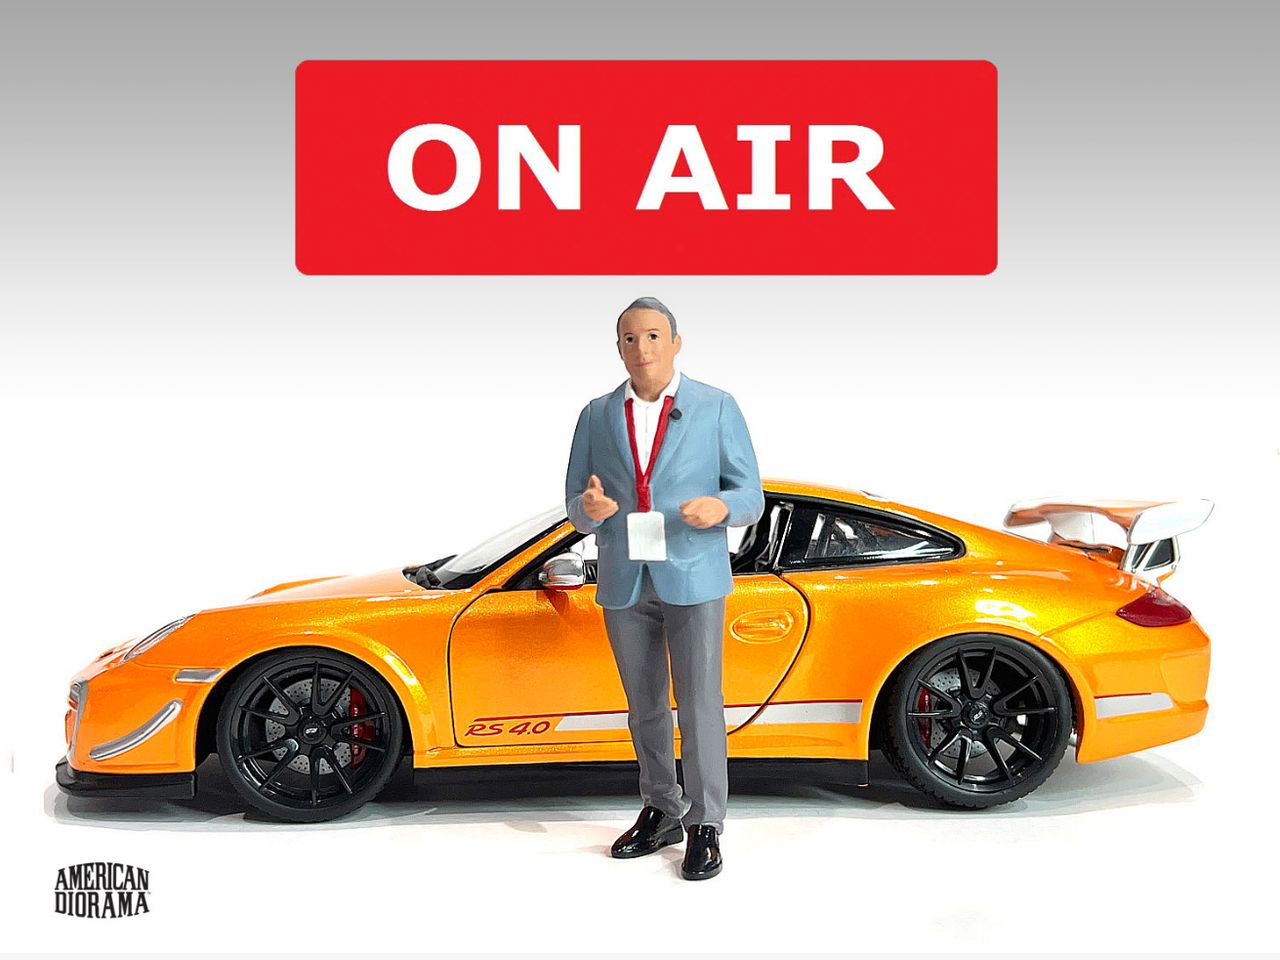 1/24 American Diorama On Air The Interviewer Figure (car models NOT included)